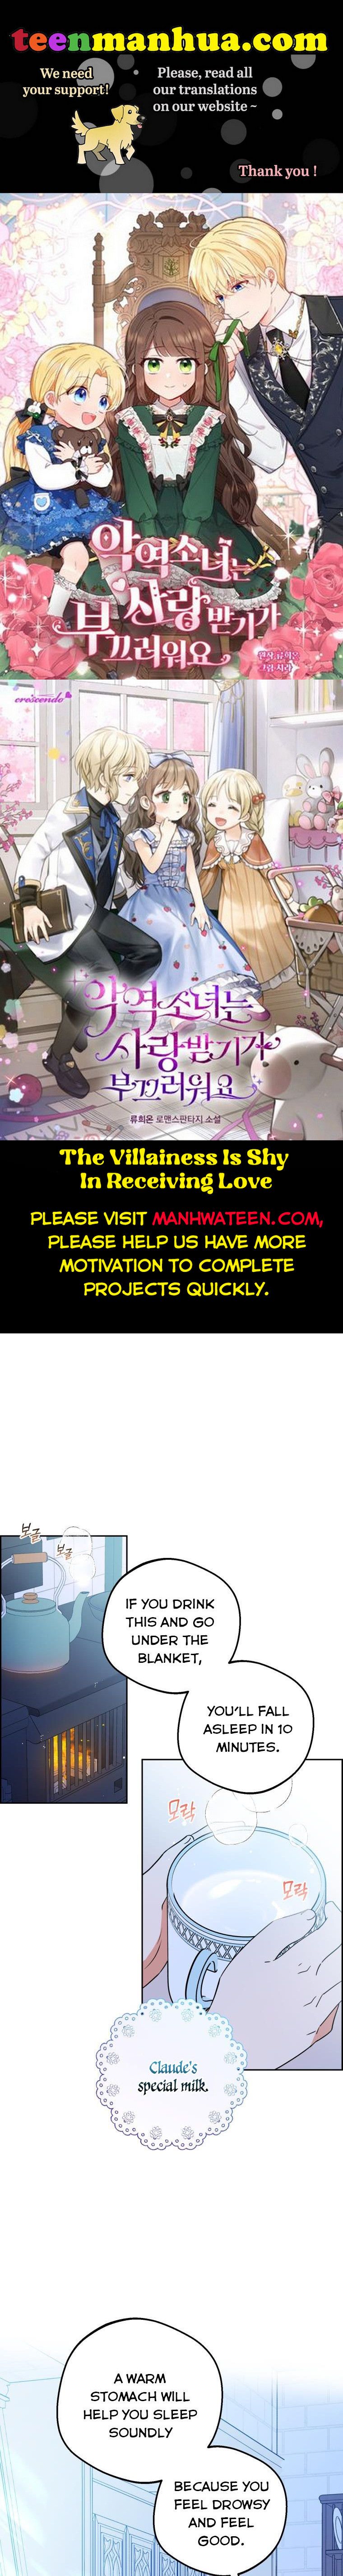 The Villainess Is Shy In Receiving Love Chapter 19 page 1